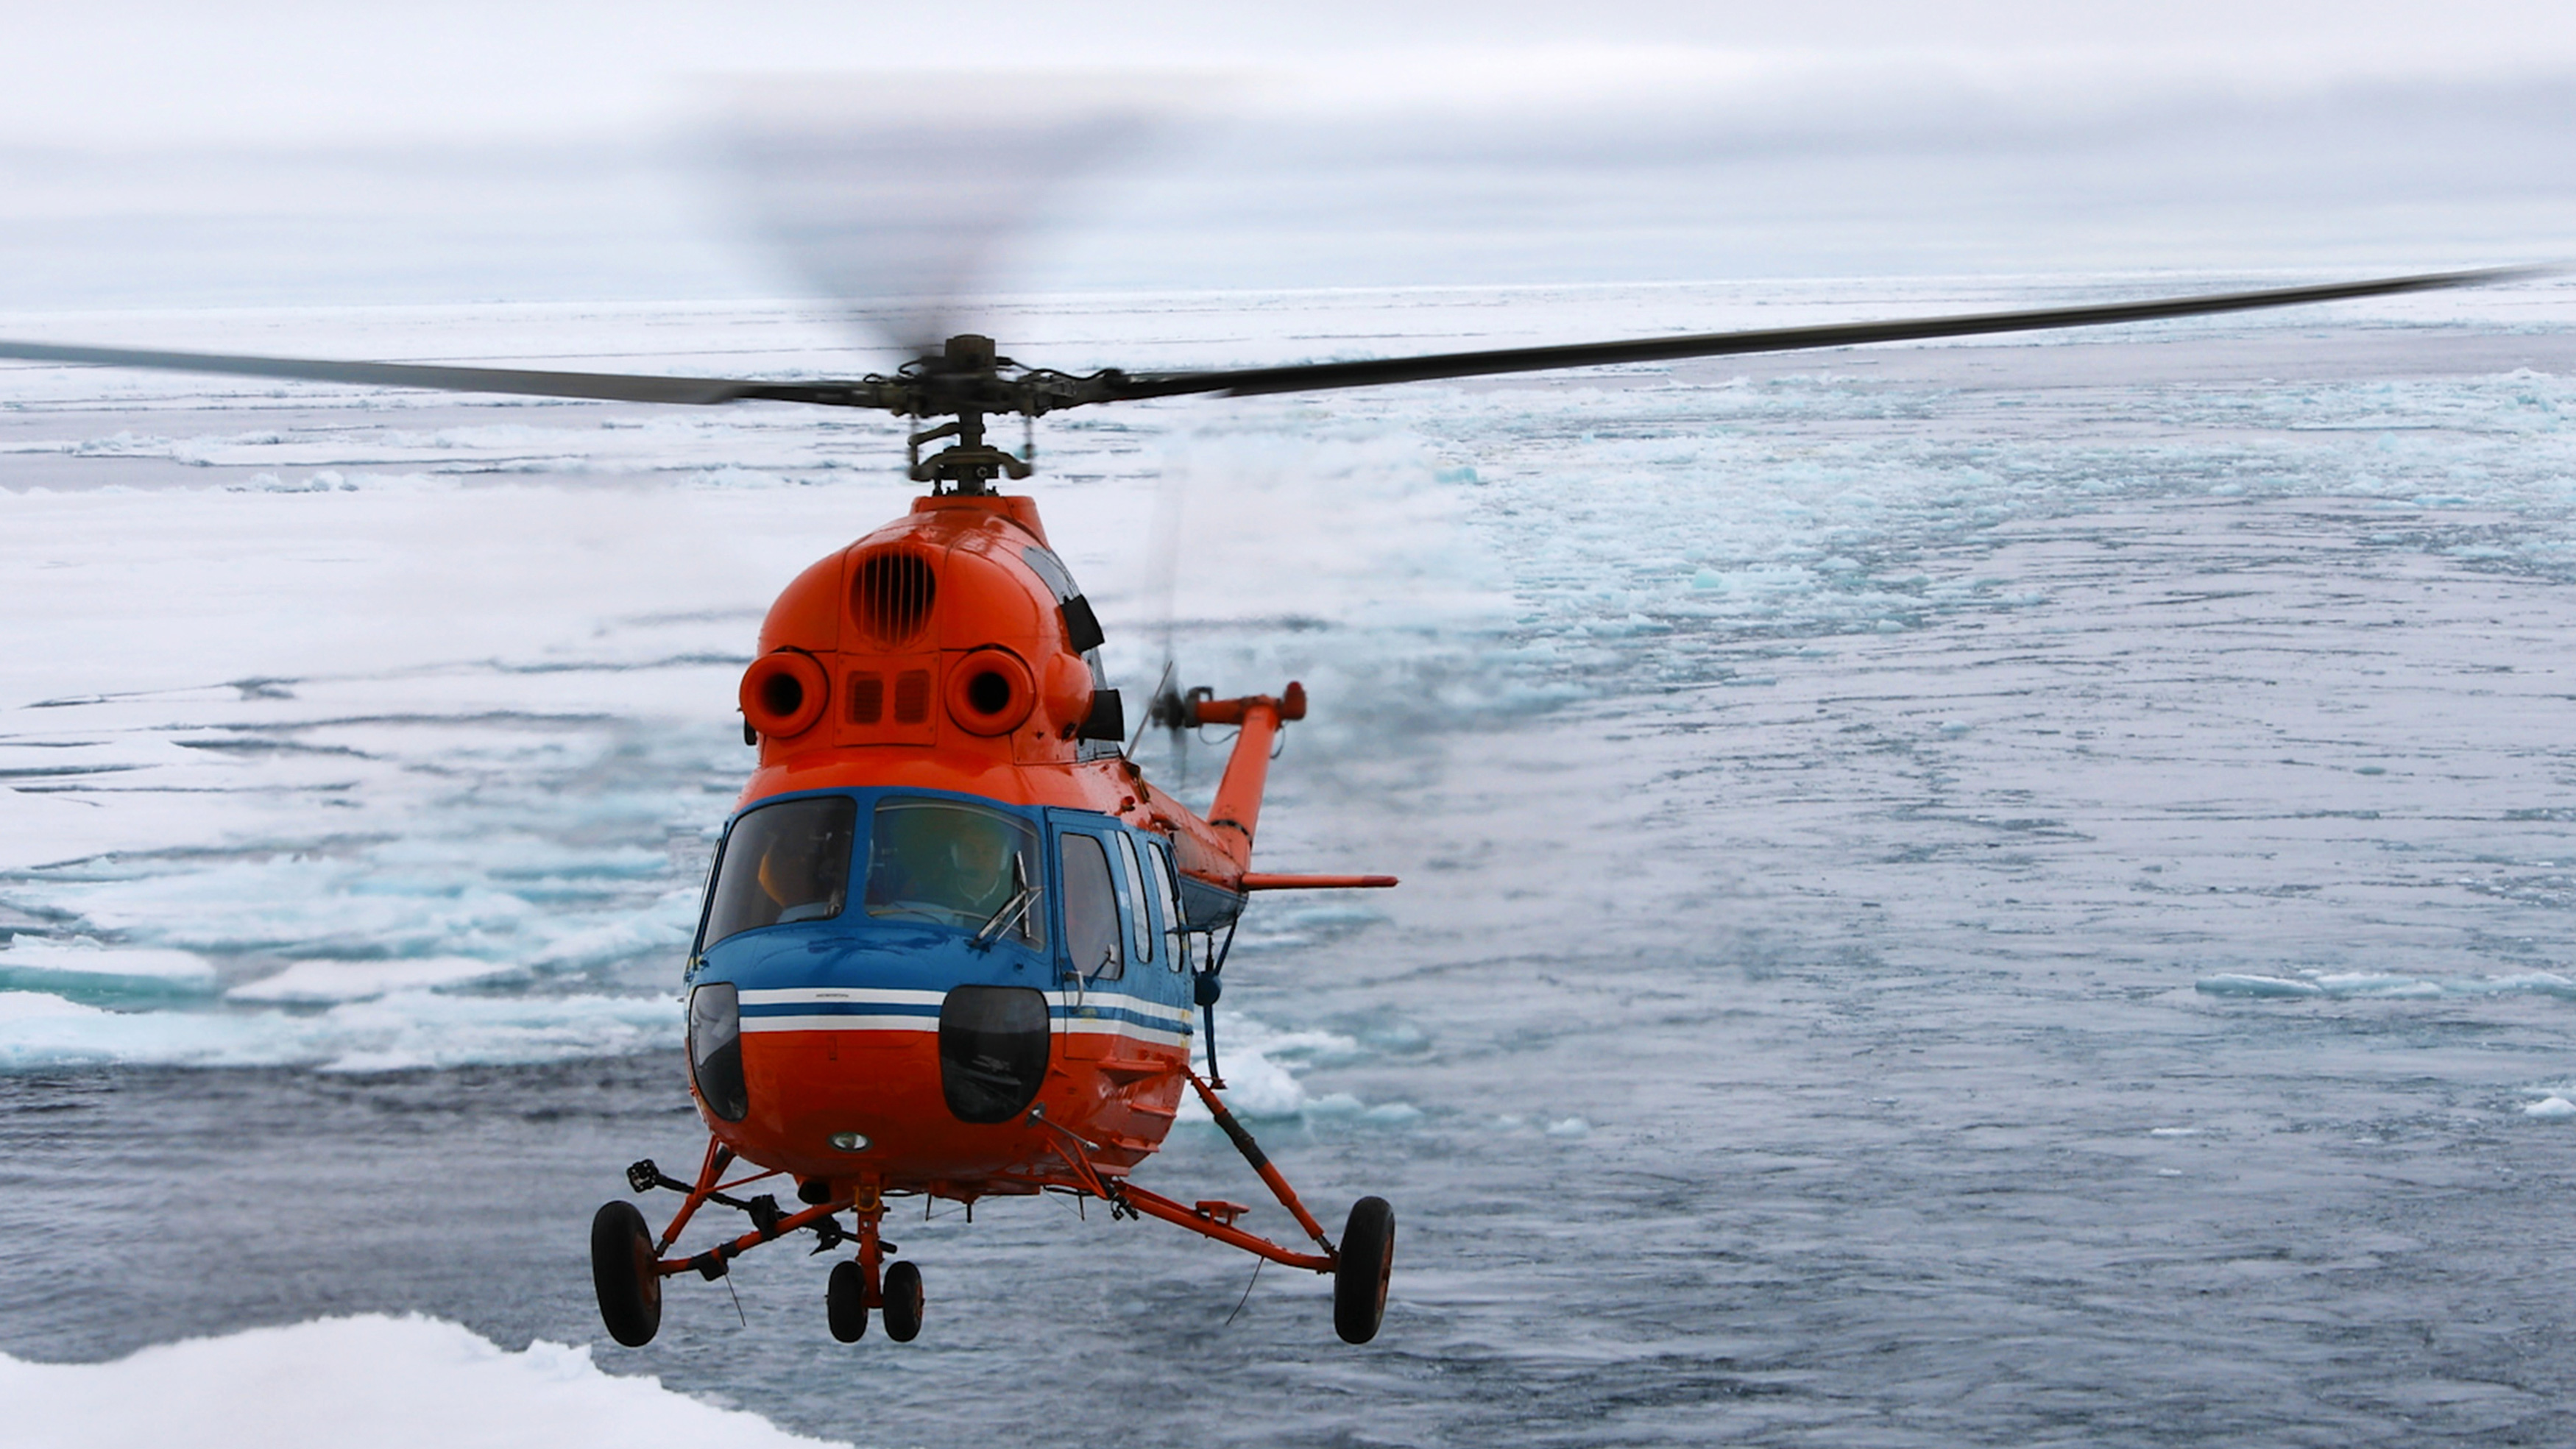 Onboard helicopters allow hydrologists and ice specialists to scout out the conditions ahead, and give passengers a bird’s eye view of the Arctic sea ice from high overhead on sightseeing flights. Photo: Dani Plumb